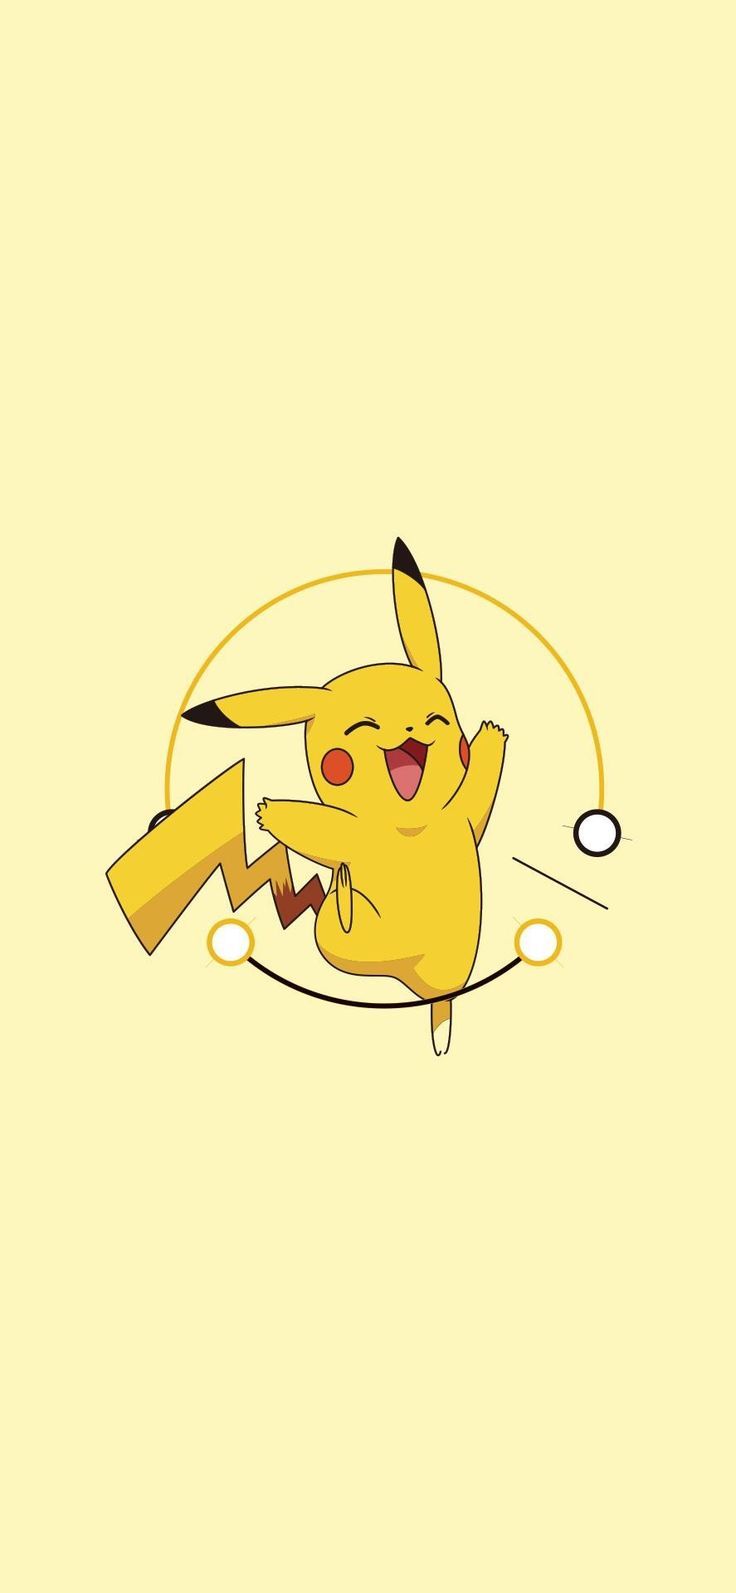 IPhone wallpaper of Pikachu with a ball of electricity - Pikachu